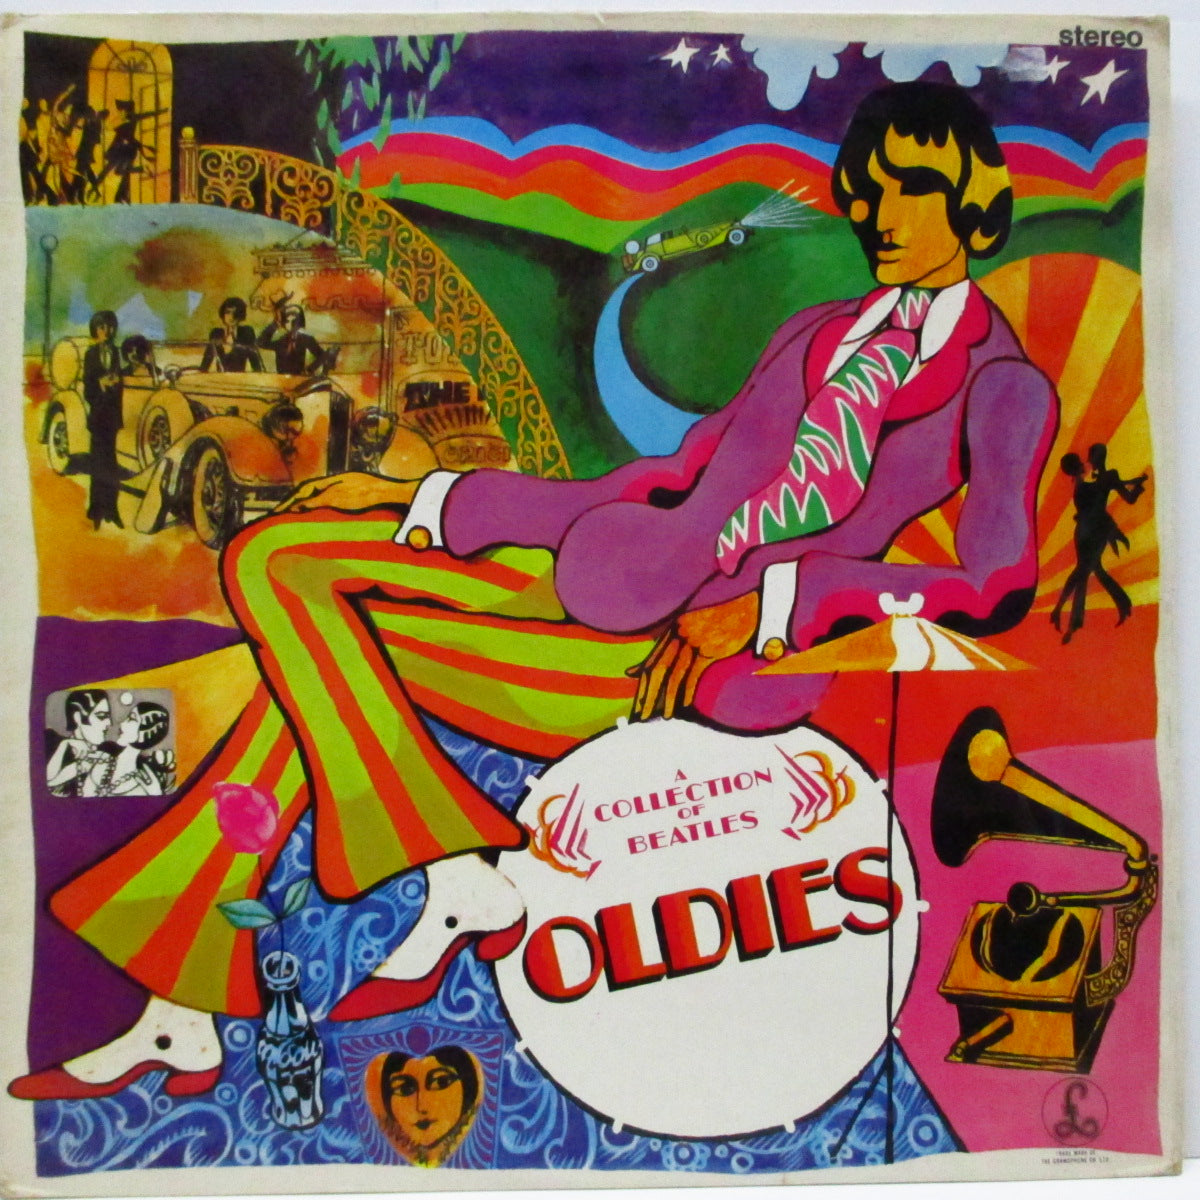 BEATLES (ビートルズ) - Collection Of Beatles Oldies (UK 初回